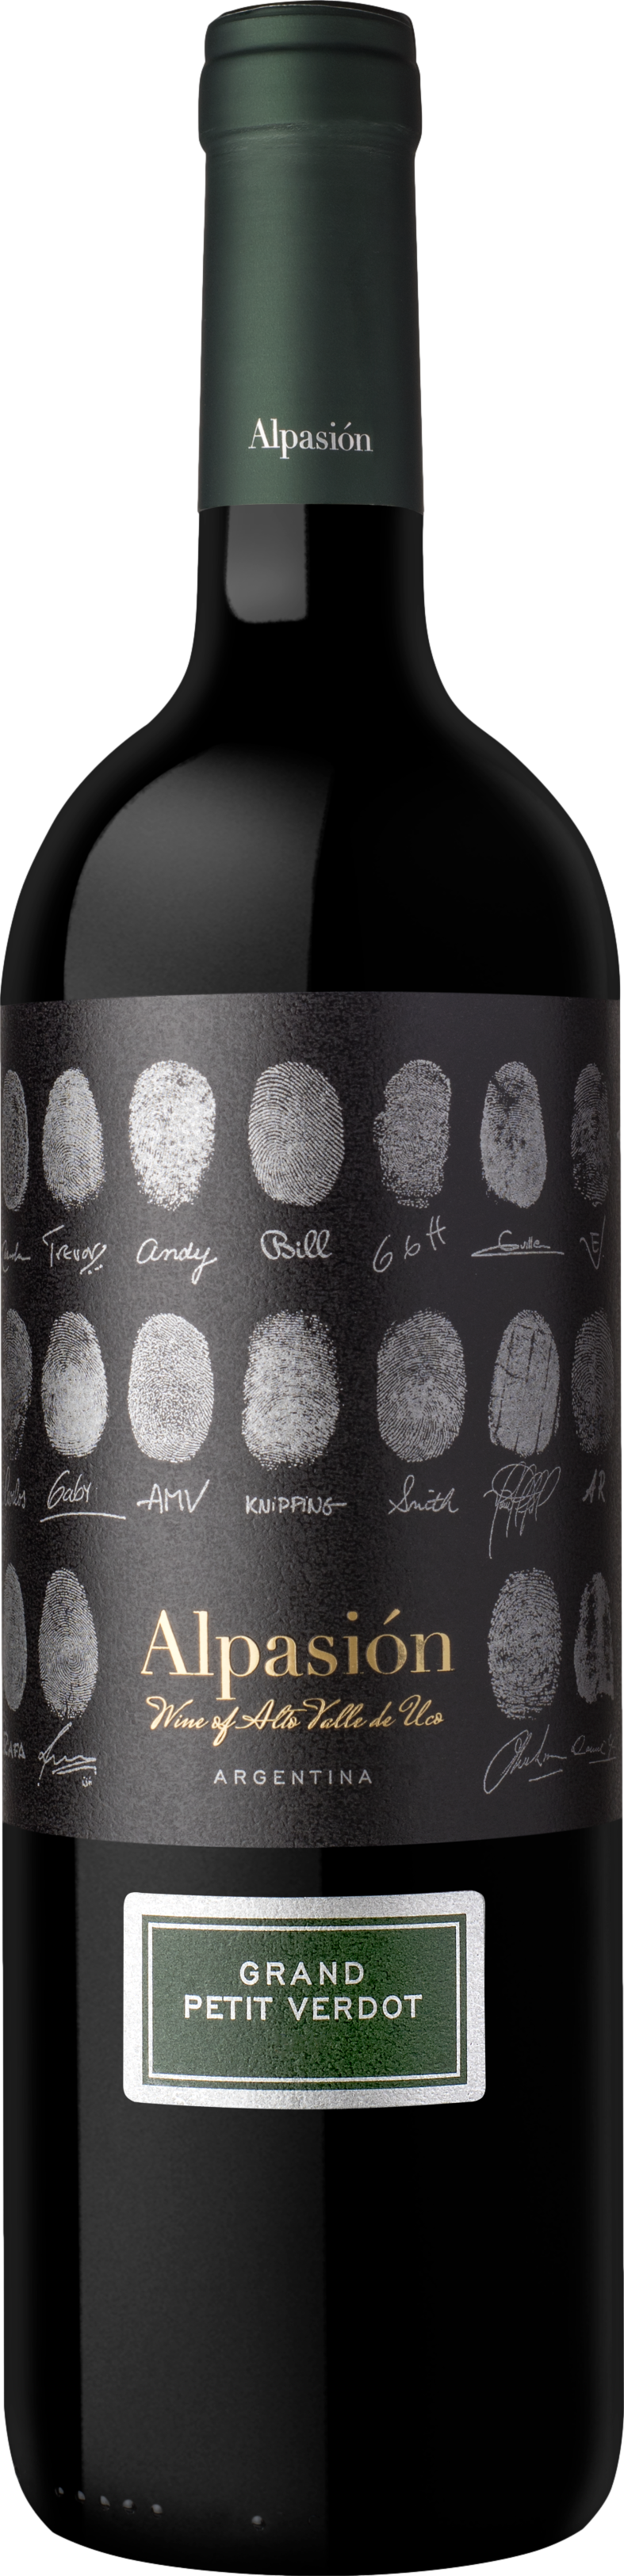 Product image of Alpasion Grand Petit Verdot 2020 from 8wines